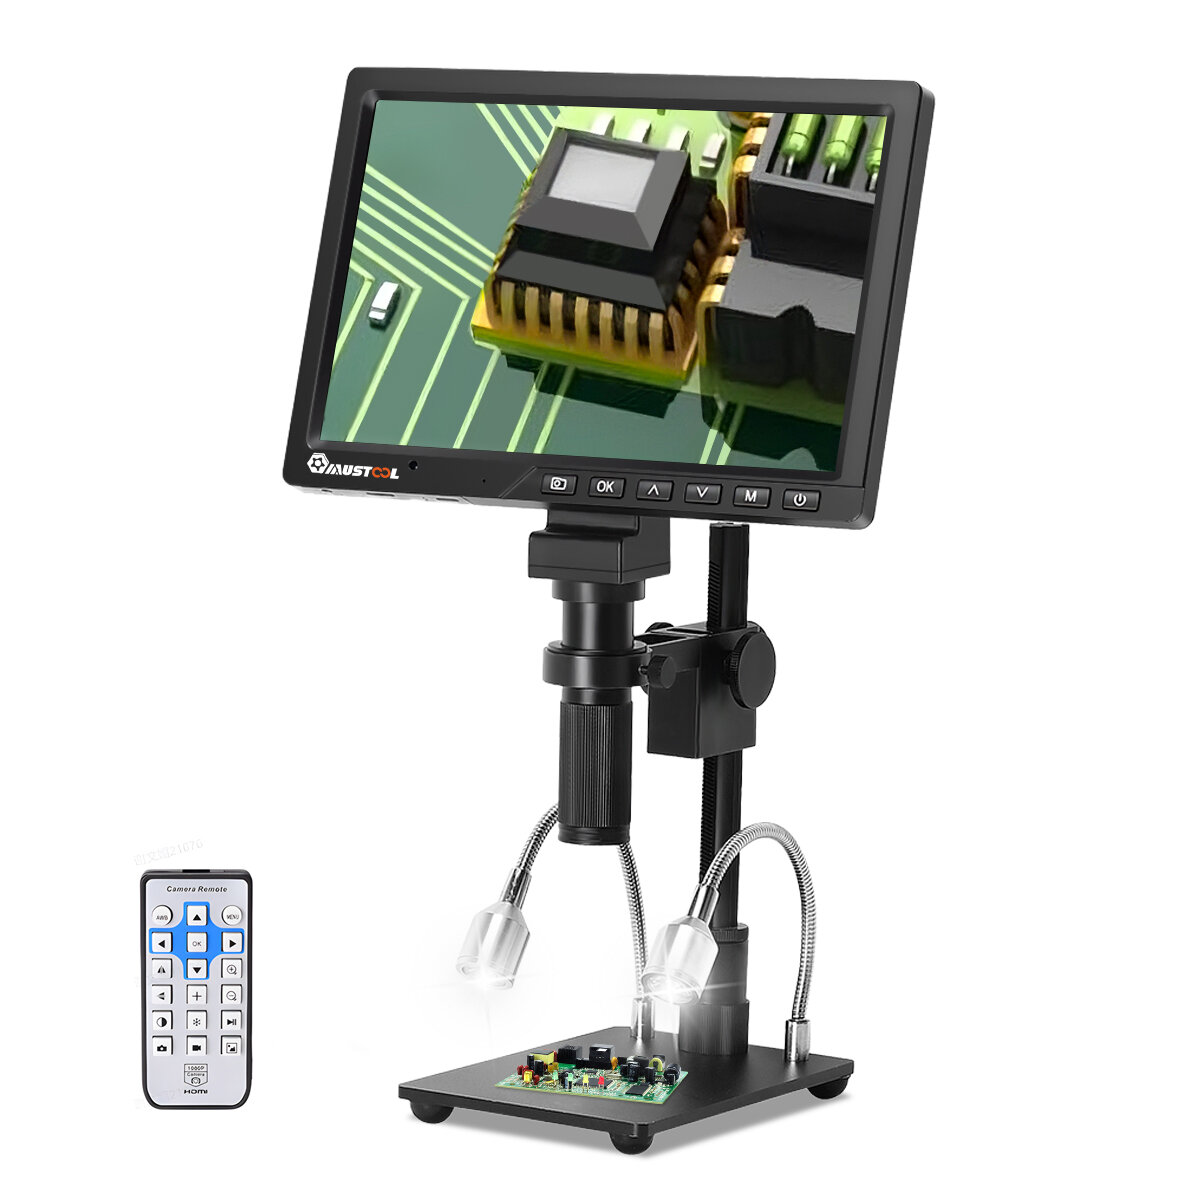  Mustool 10.1 inch LCD HD Video Microscope with 150X C Mount Lens Electronic Microscope Camera with Metal Stand Professio